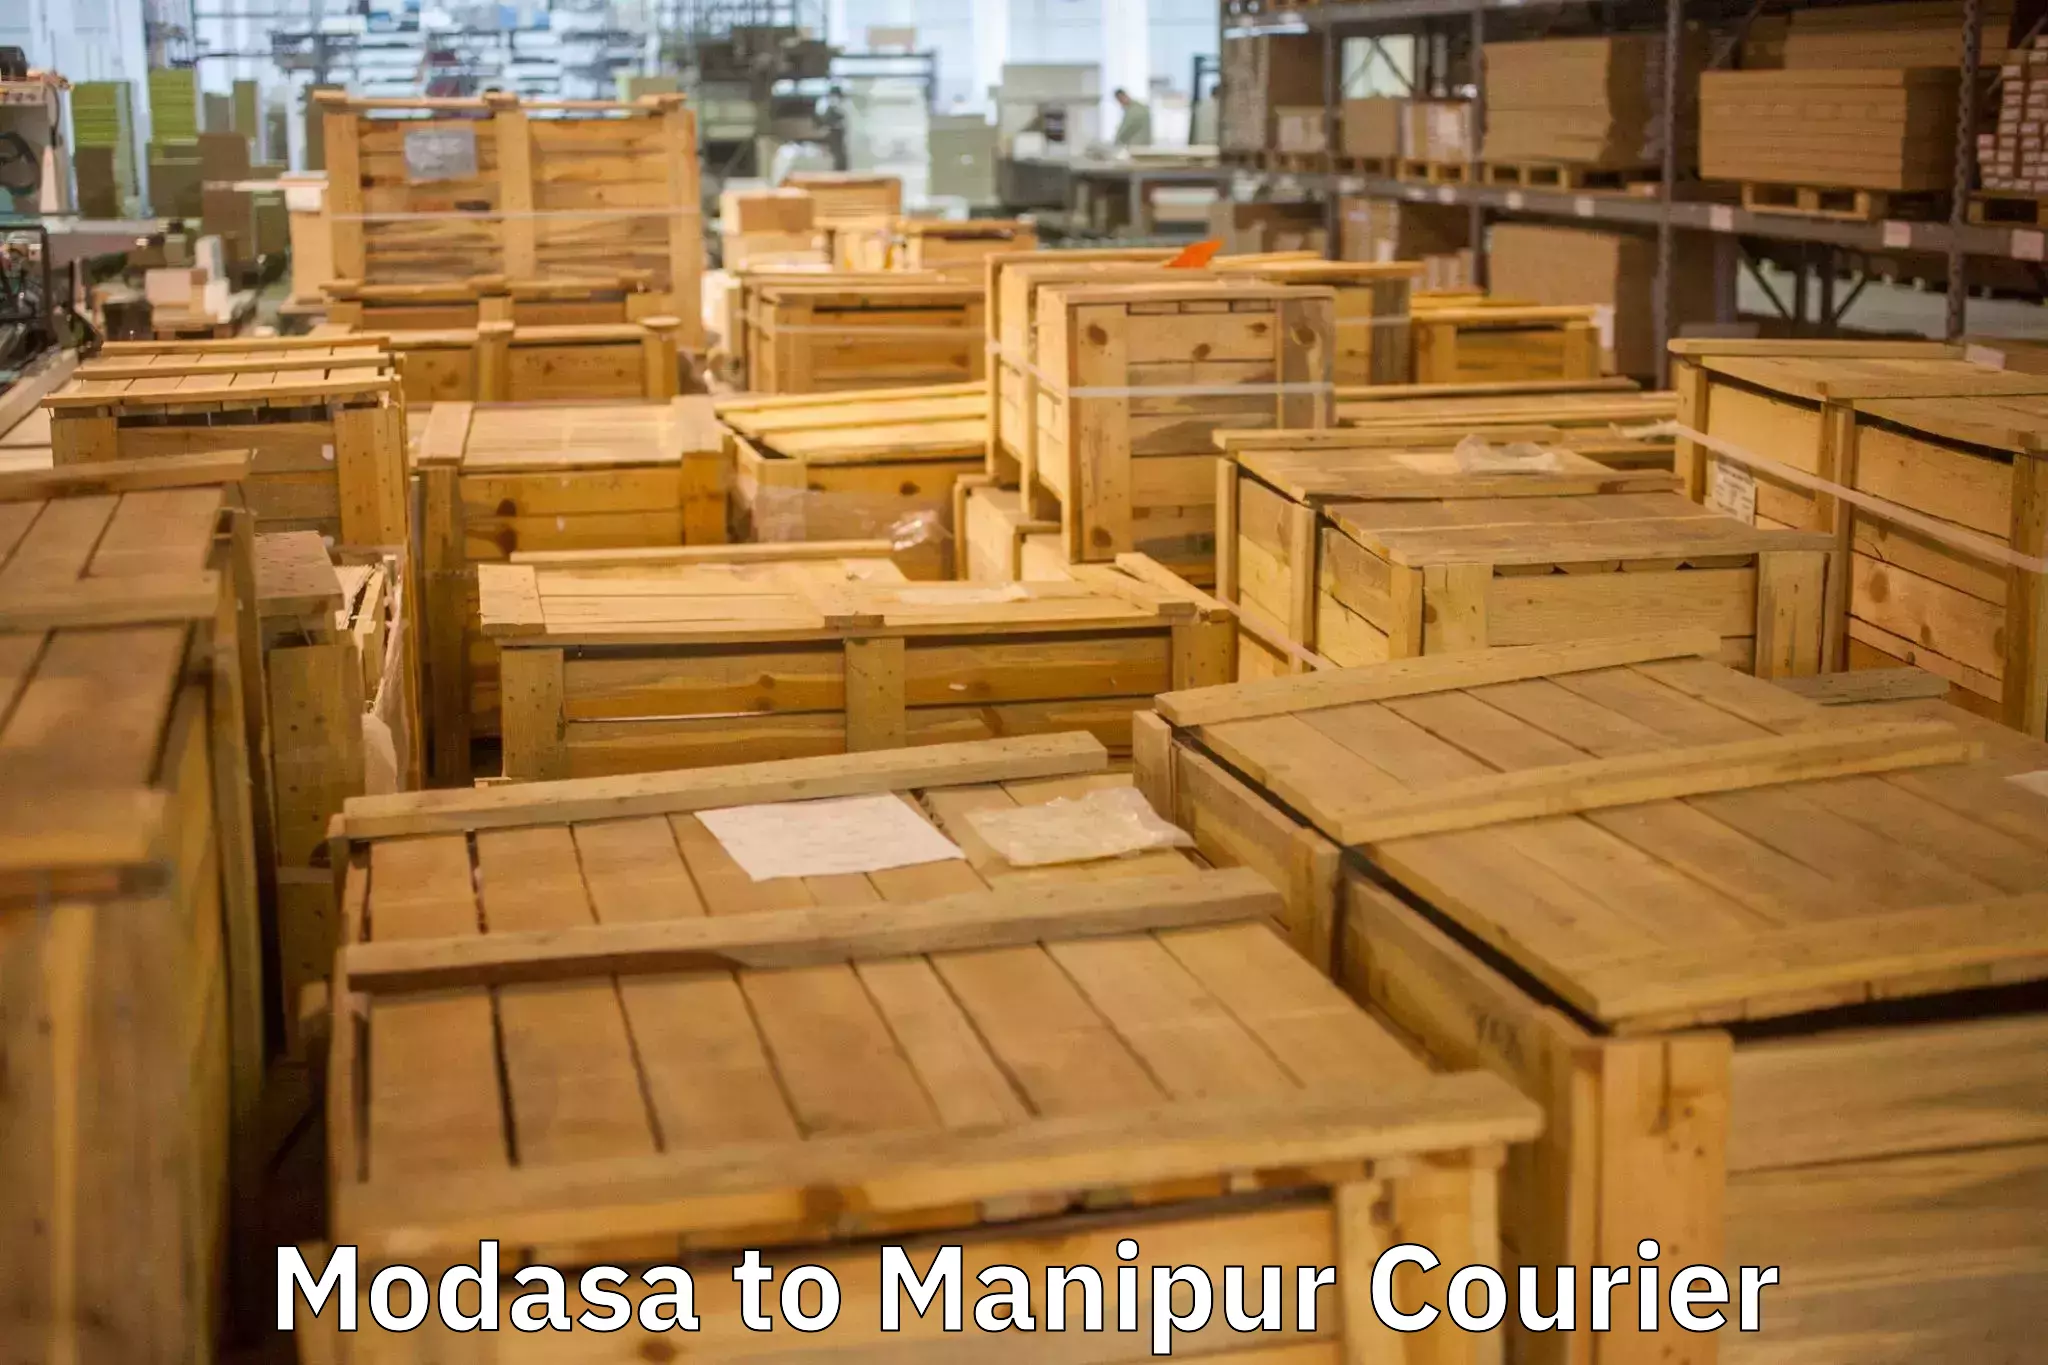 Expert goods movers Modasa to Manipur